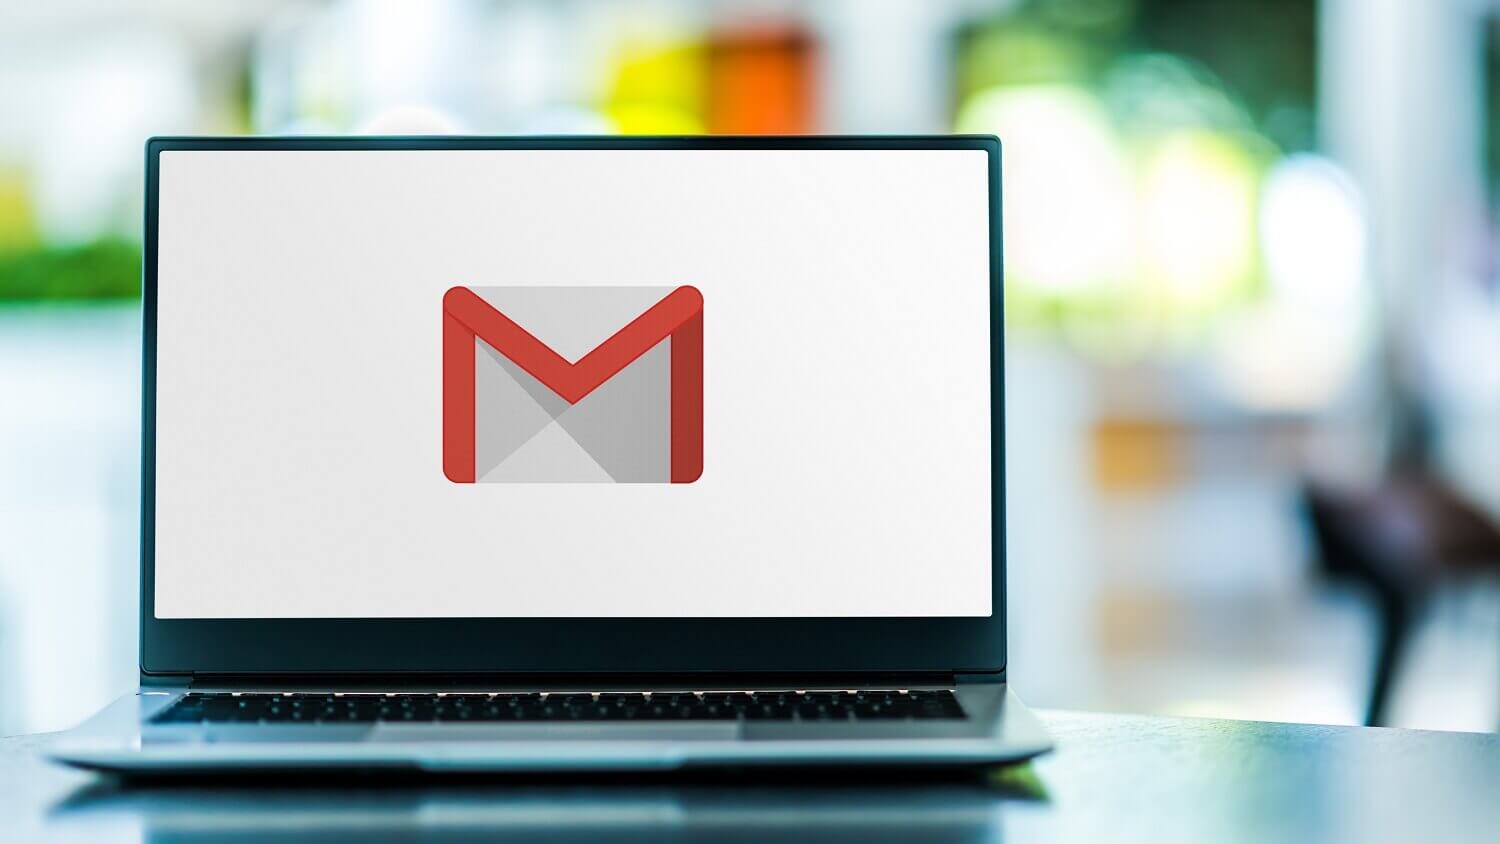 How to Get Gmail as a Desktop App - Amitree